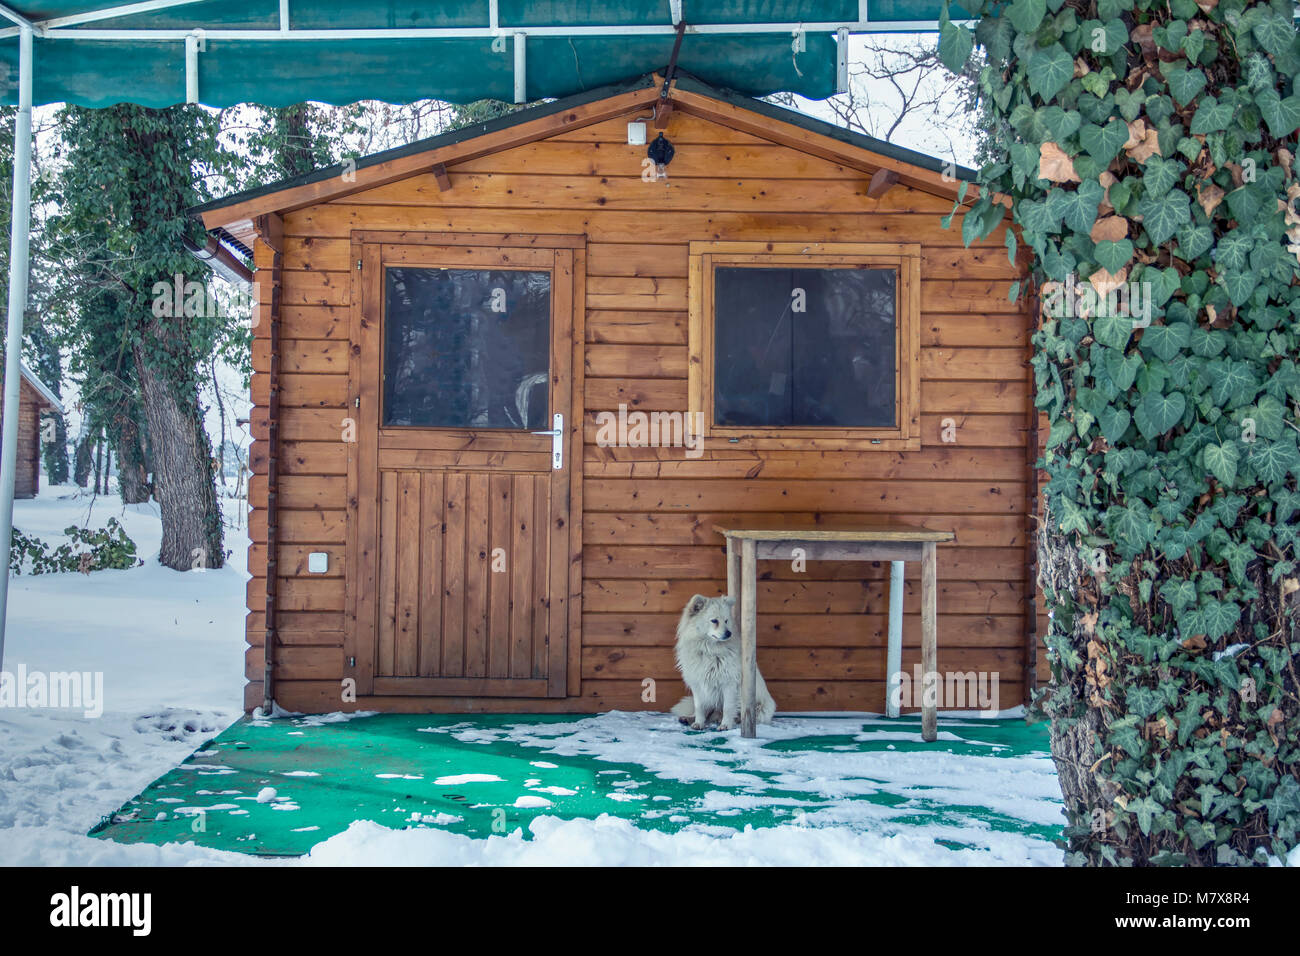 Serbia - A little mutt dog sitting in front of the cabin door Stock Photo